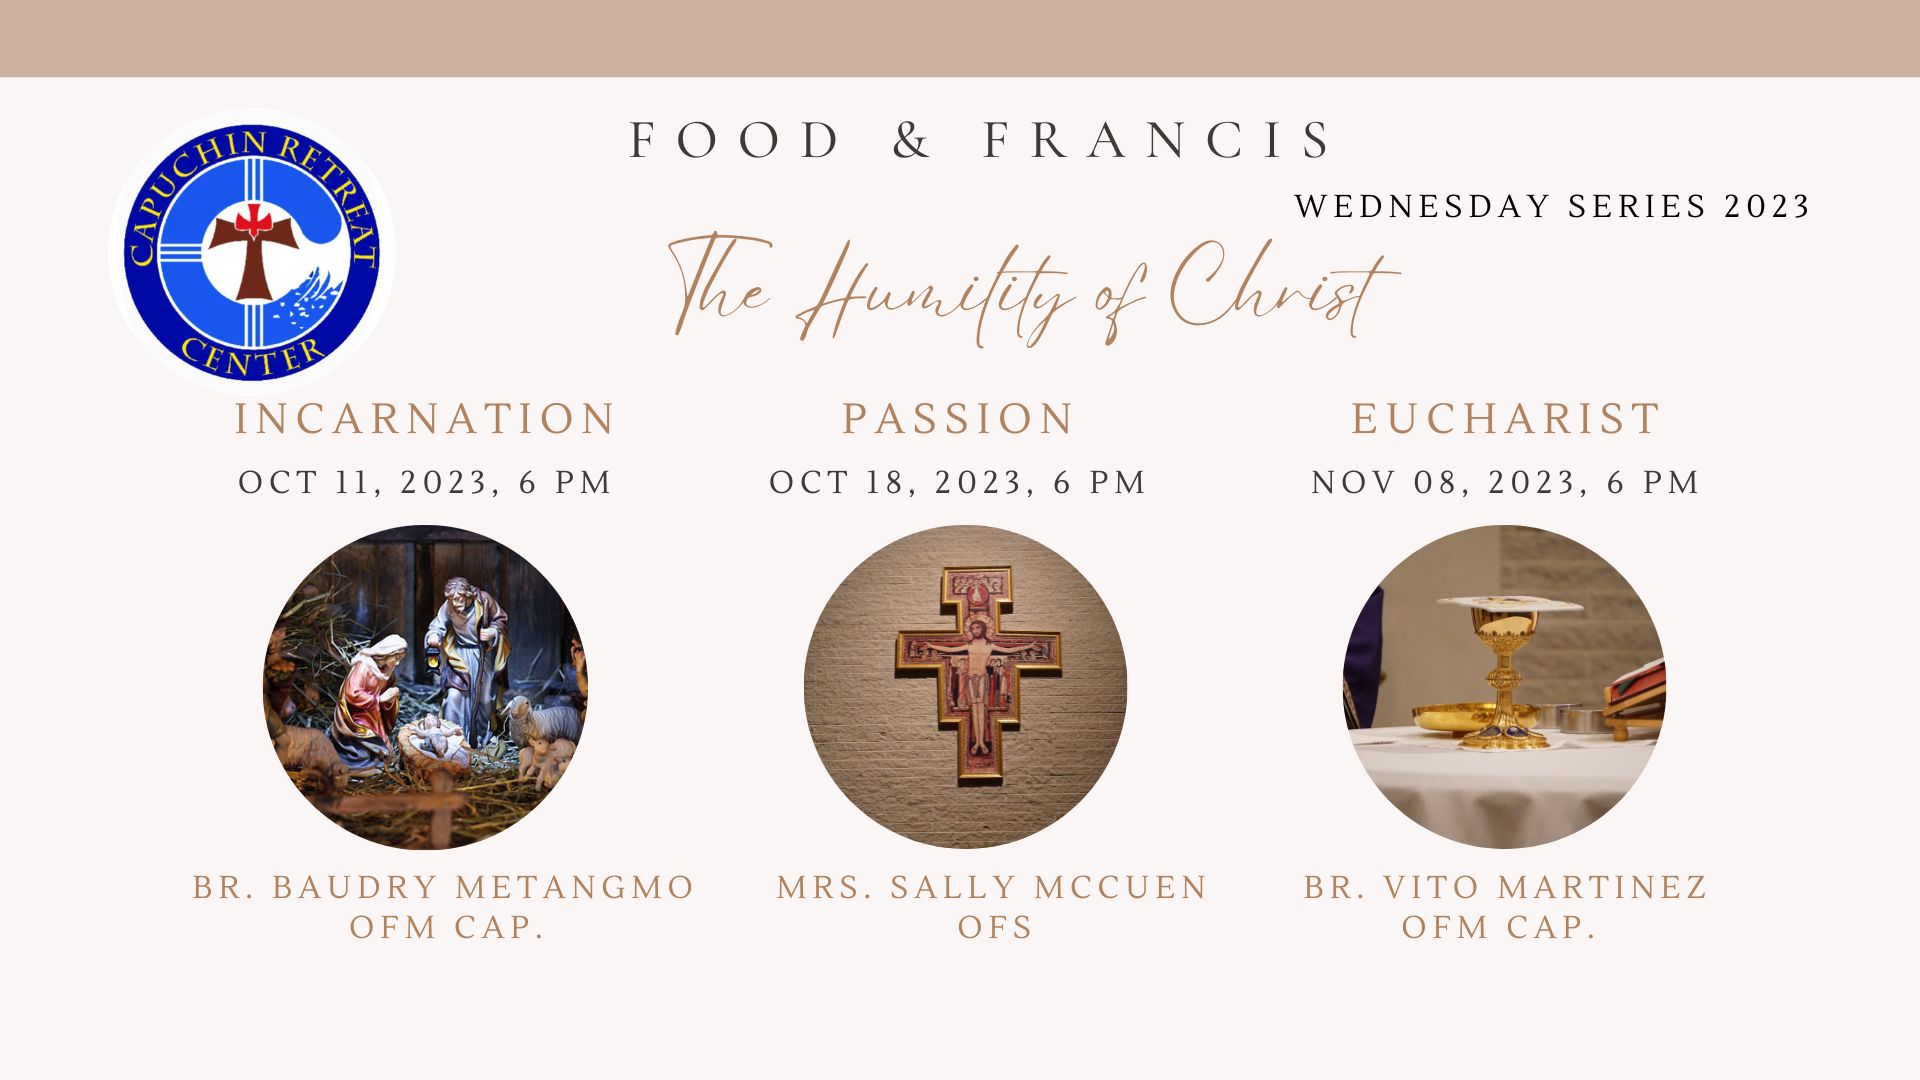 Food & Francis: The Humility of Christ in the Eucharist